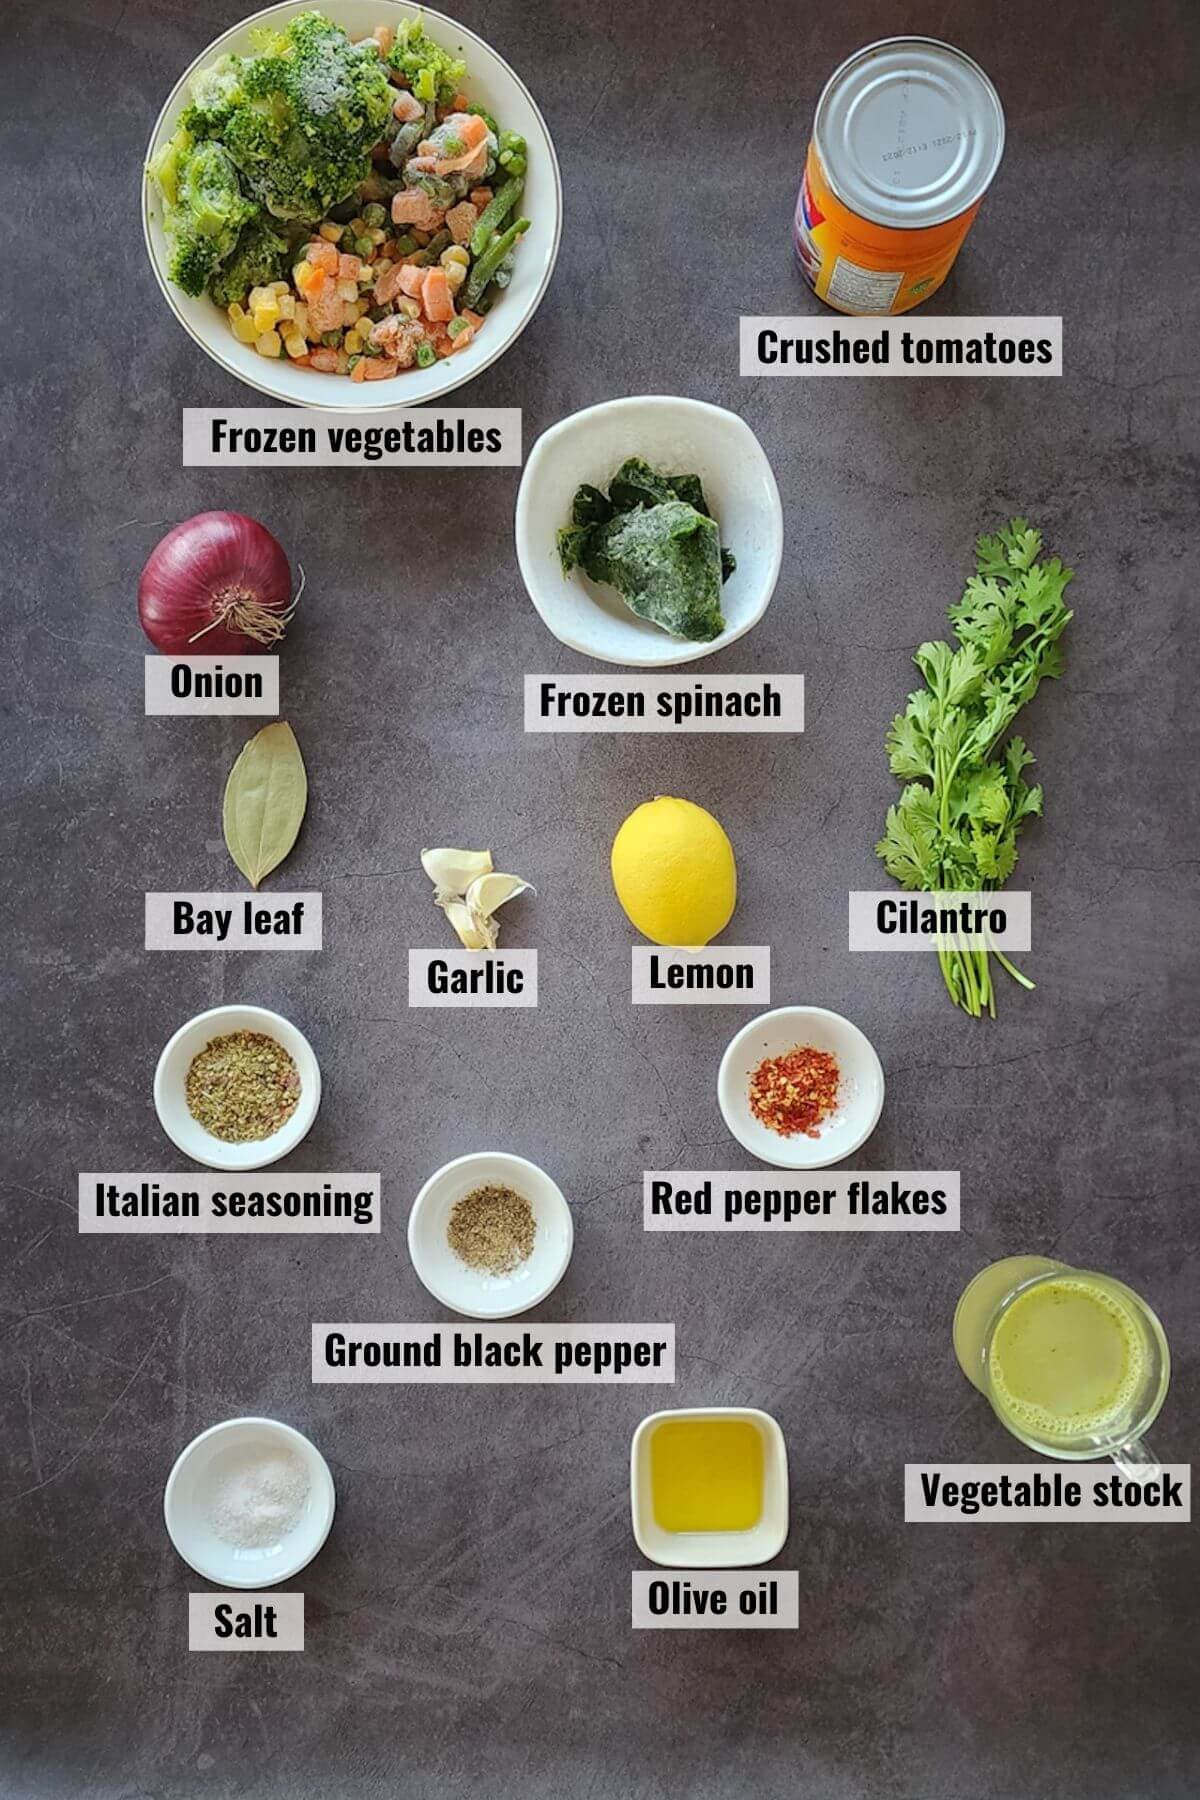 Ingredients needed to make soup with frozen vegetables.